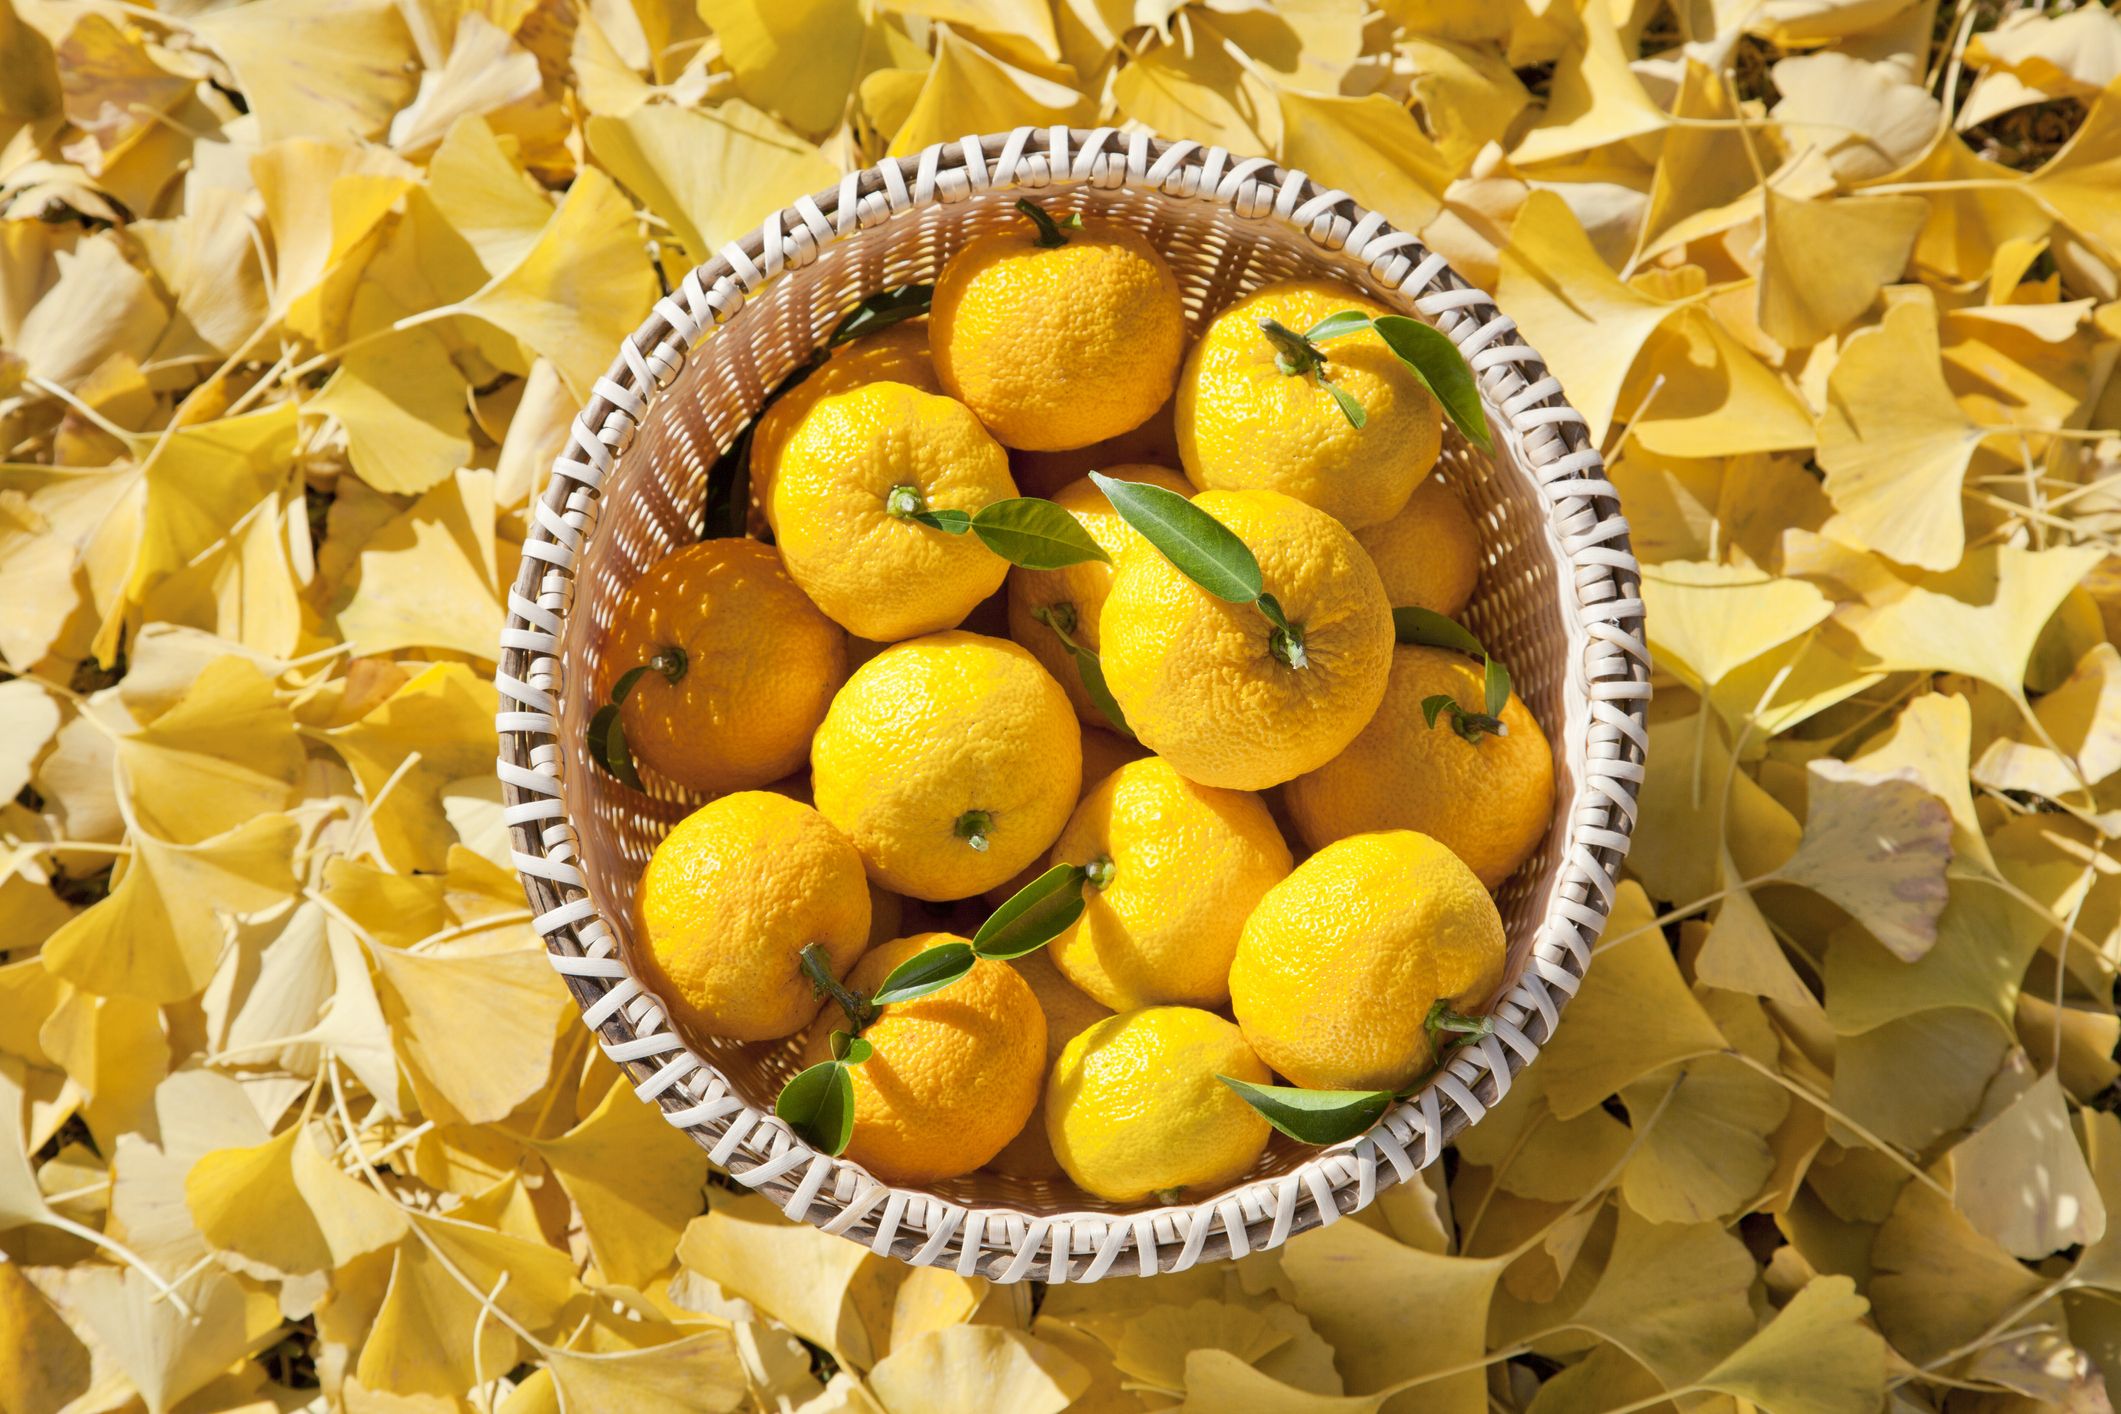 How To Use Yuzu Fruit: The Ultimate Guide to Cooking with Yuzu